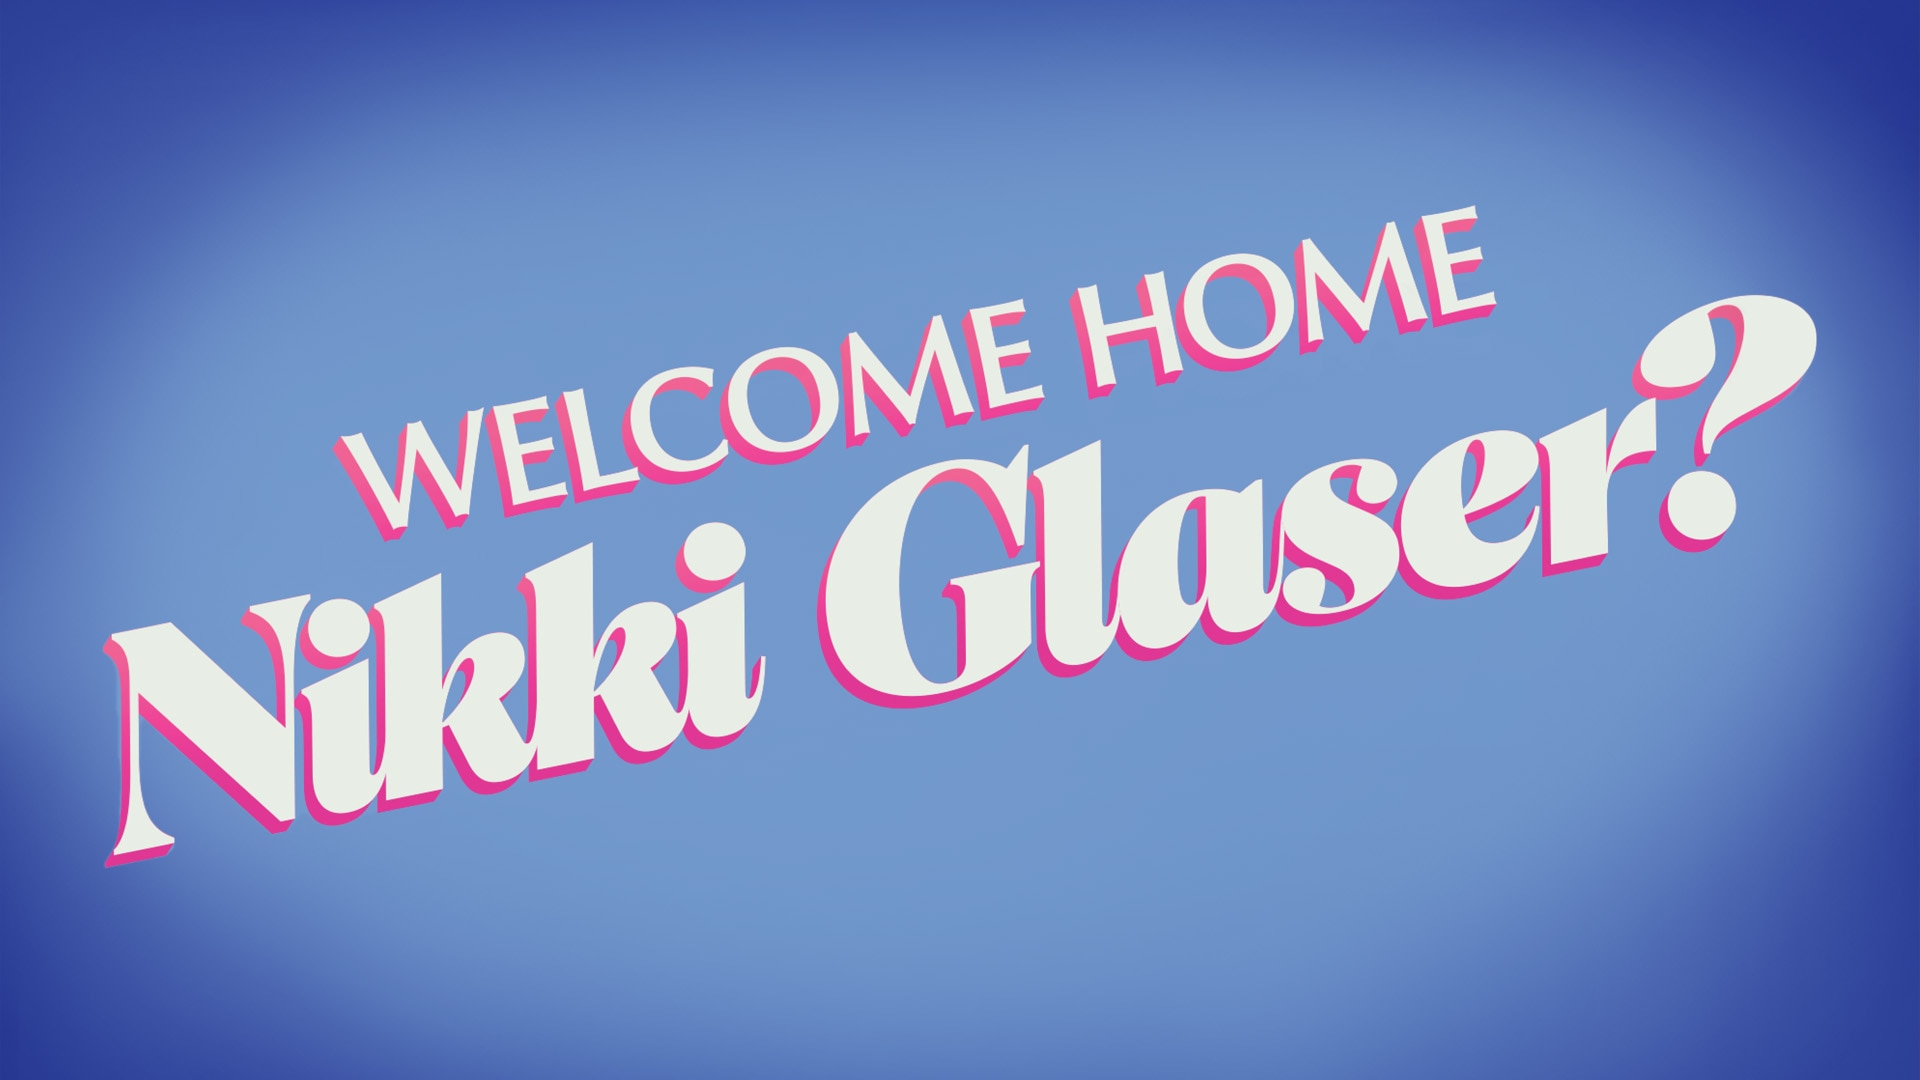 Welcome Home Nikki Glaser? image picture picture